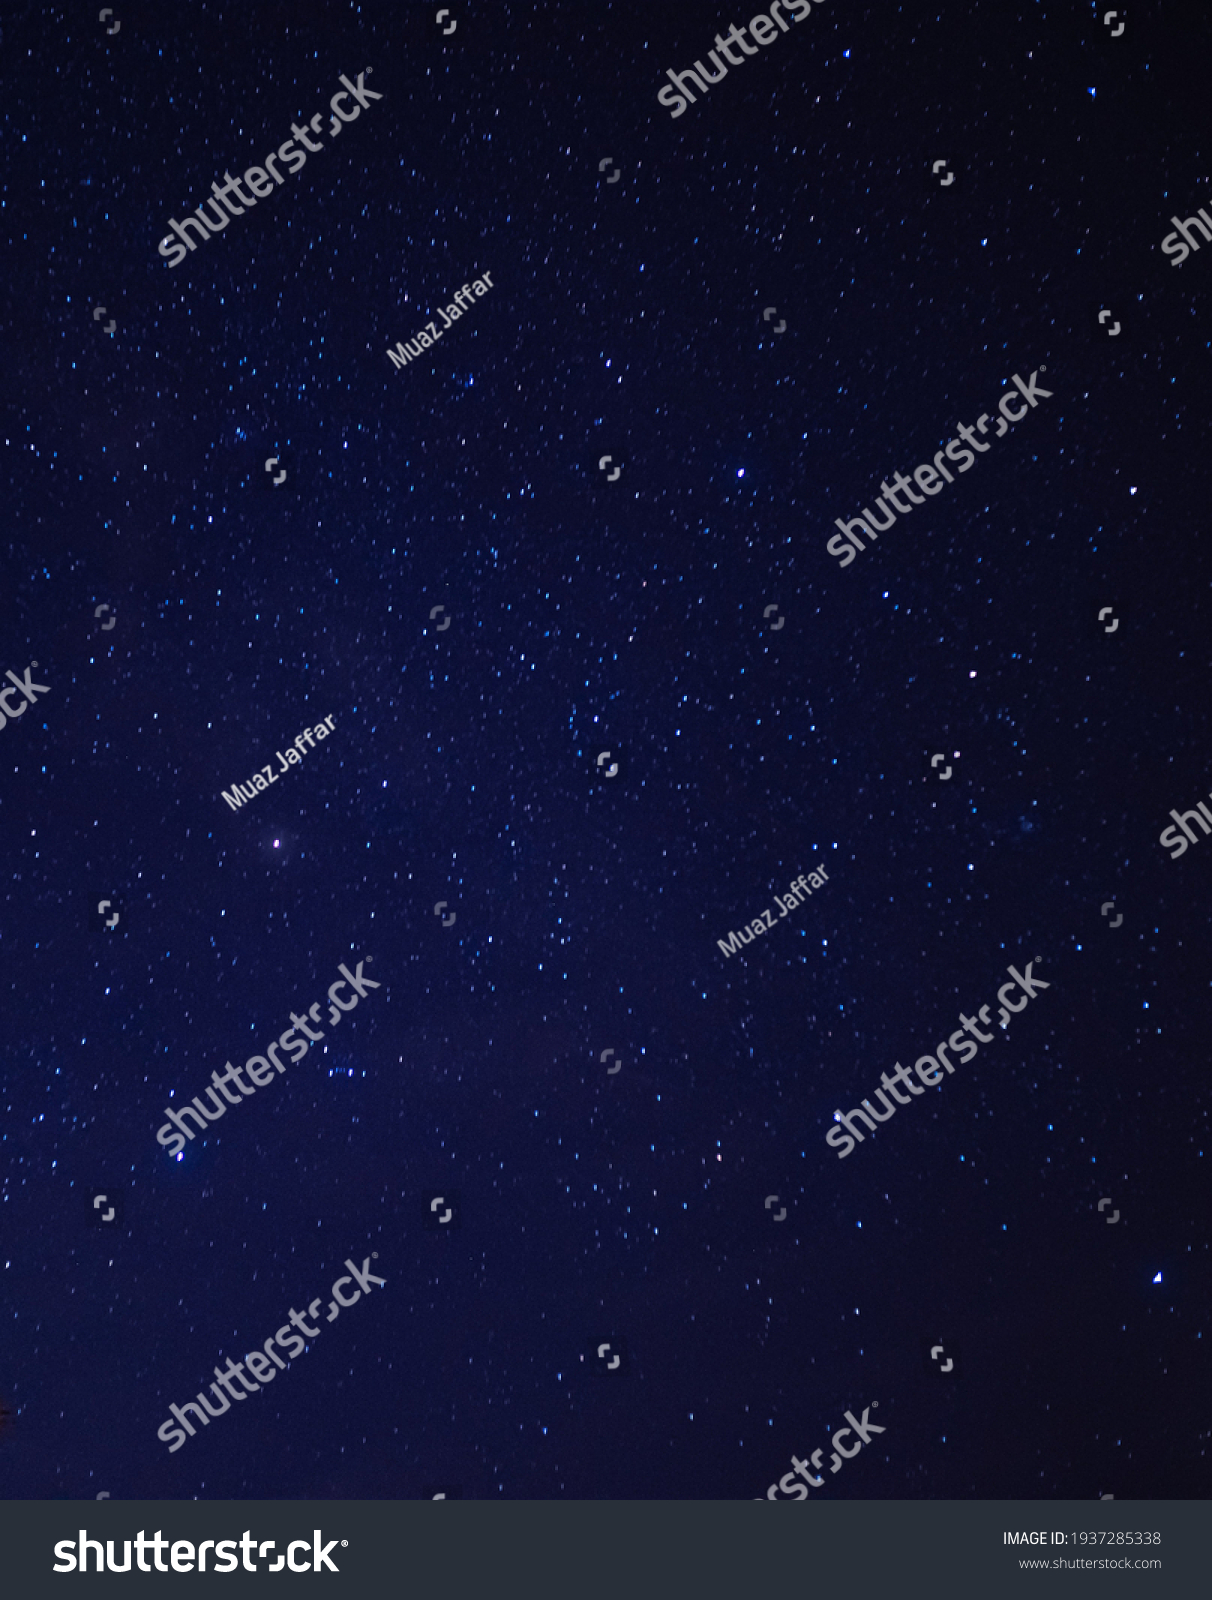 Background image of starry night sky. Image contains noise and grains due to high ISO and soft focus due to slow shutter. #1937285338